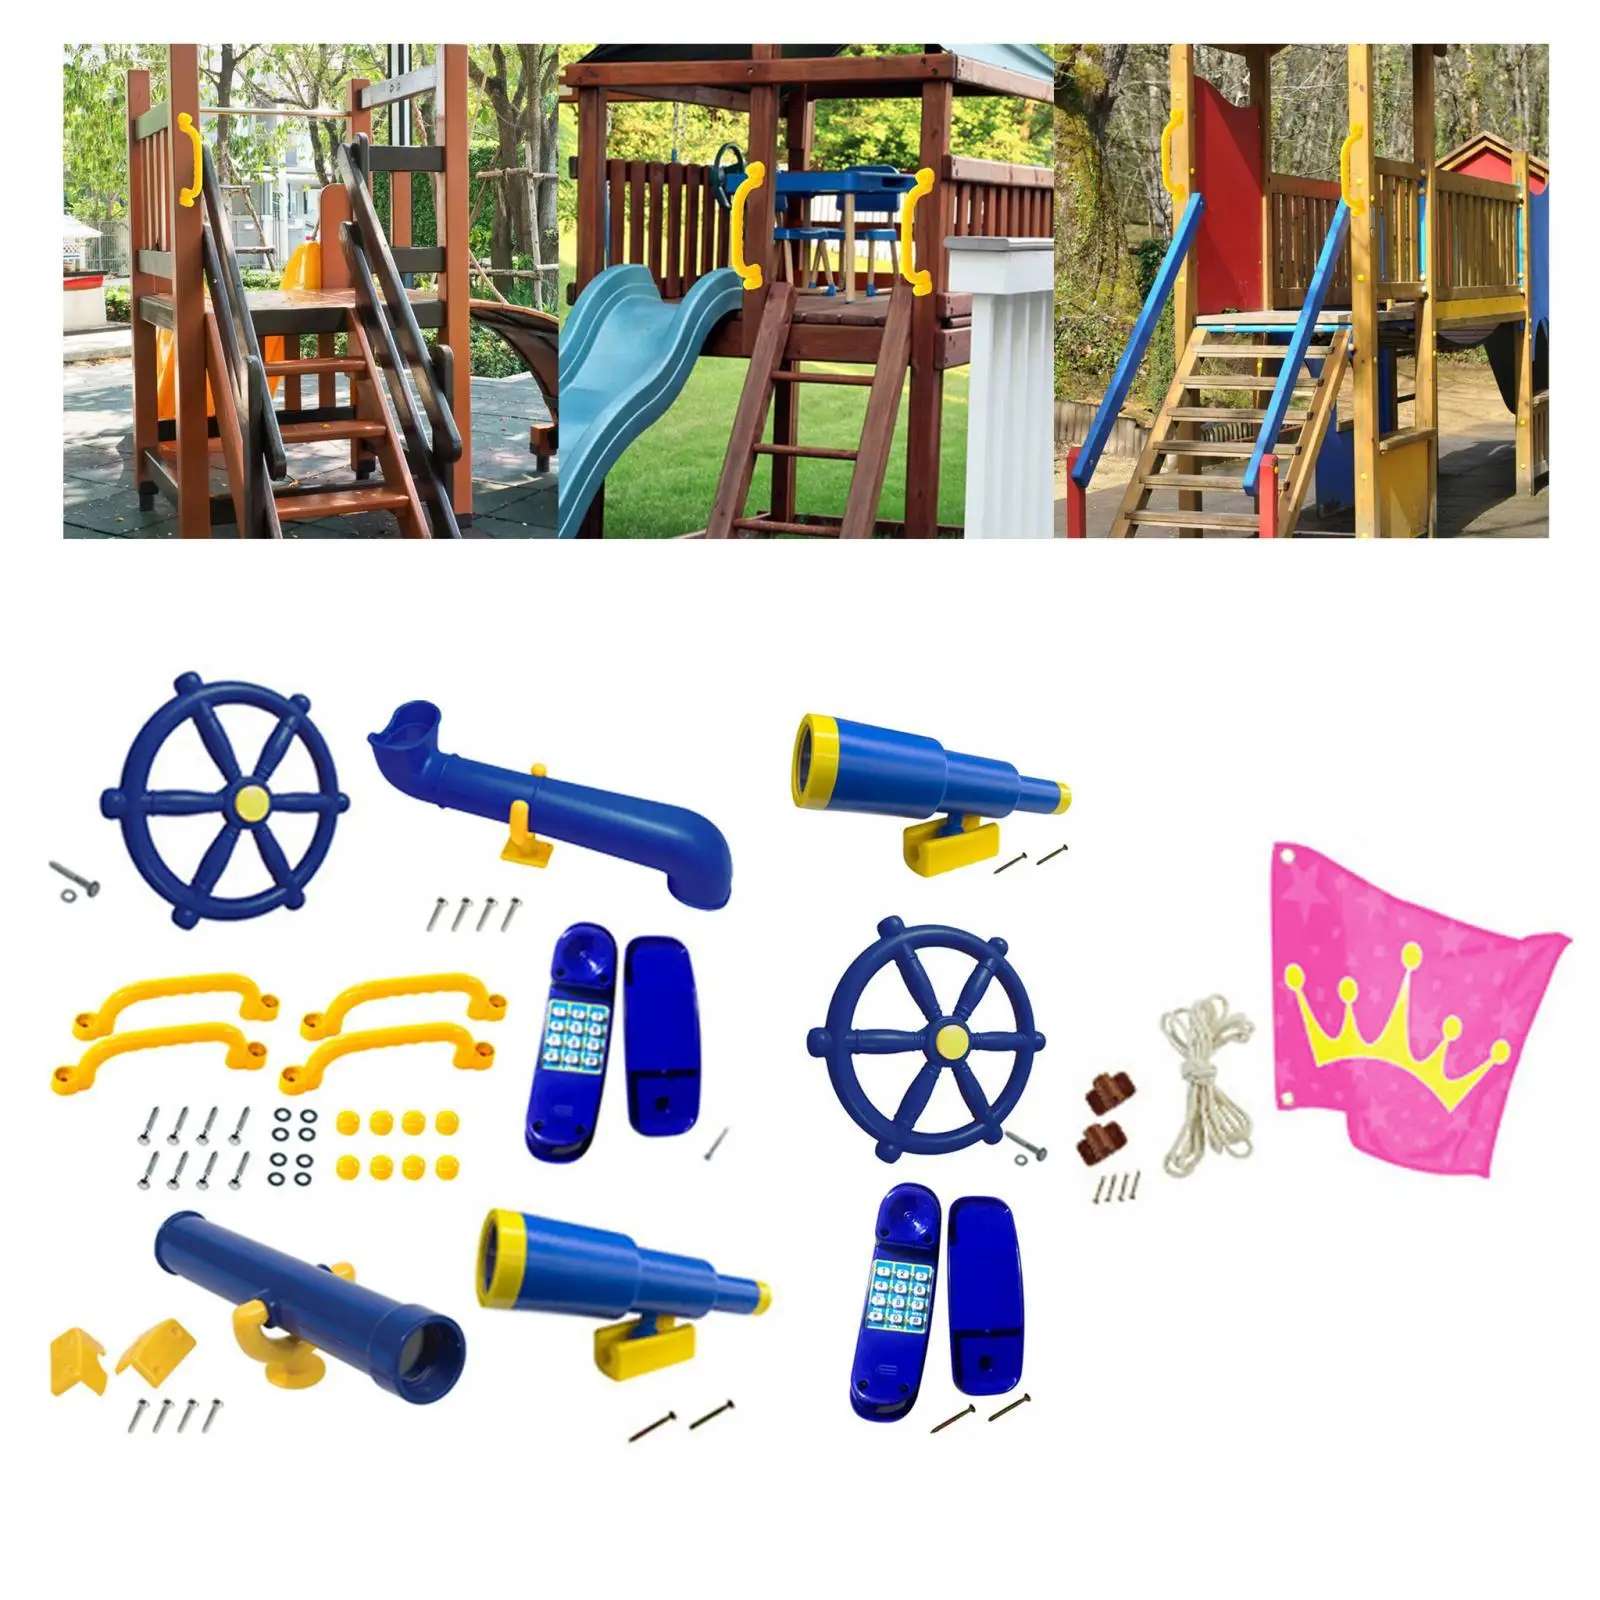 Playground Accessories Pirate Telescope Heavy Duty Swing Playground Accessories for Backyard Treehouse Play House